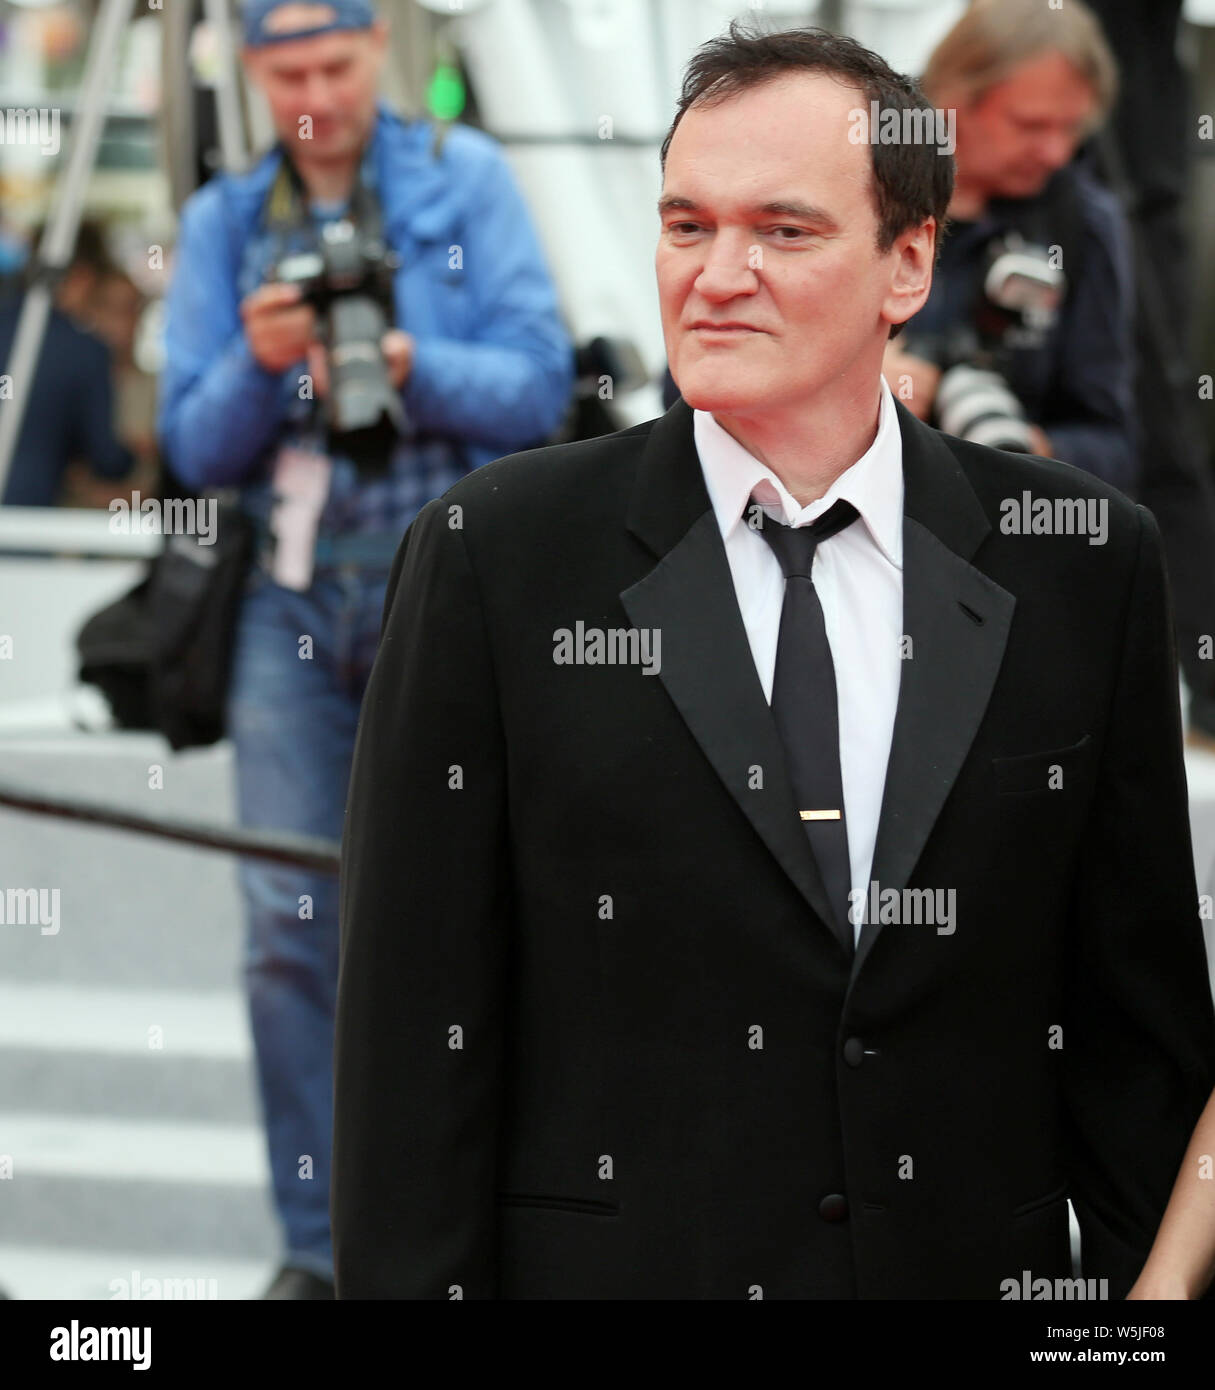 CANNES, FRANCE - MAY 18: Quentin Tarantino attends The Wild Goose Lake screening during the 72nd Cannes Film Festival (Mickael Chavet) Stock Photo